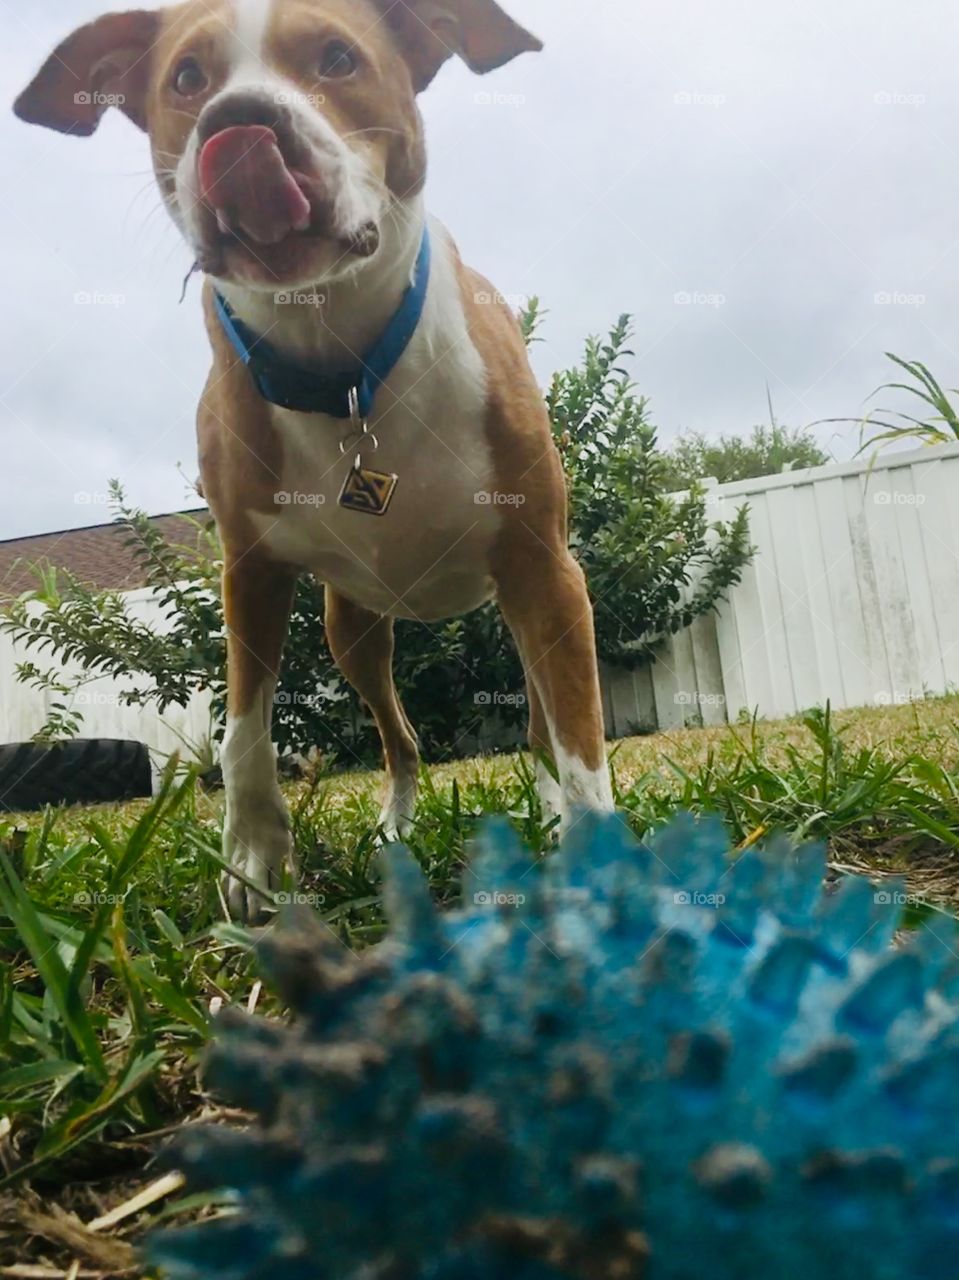 Rescue pitbull all dirty from playing ball